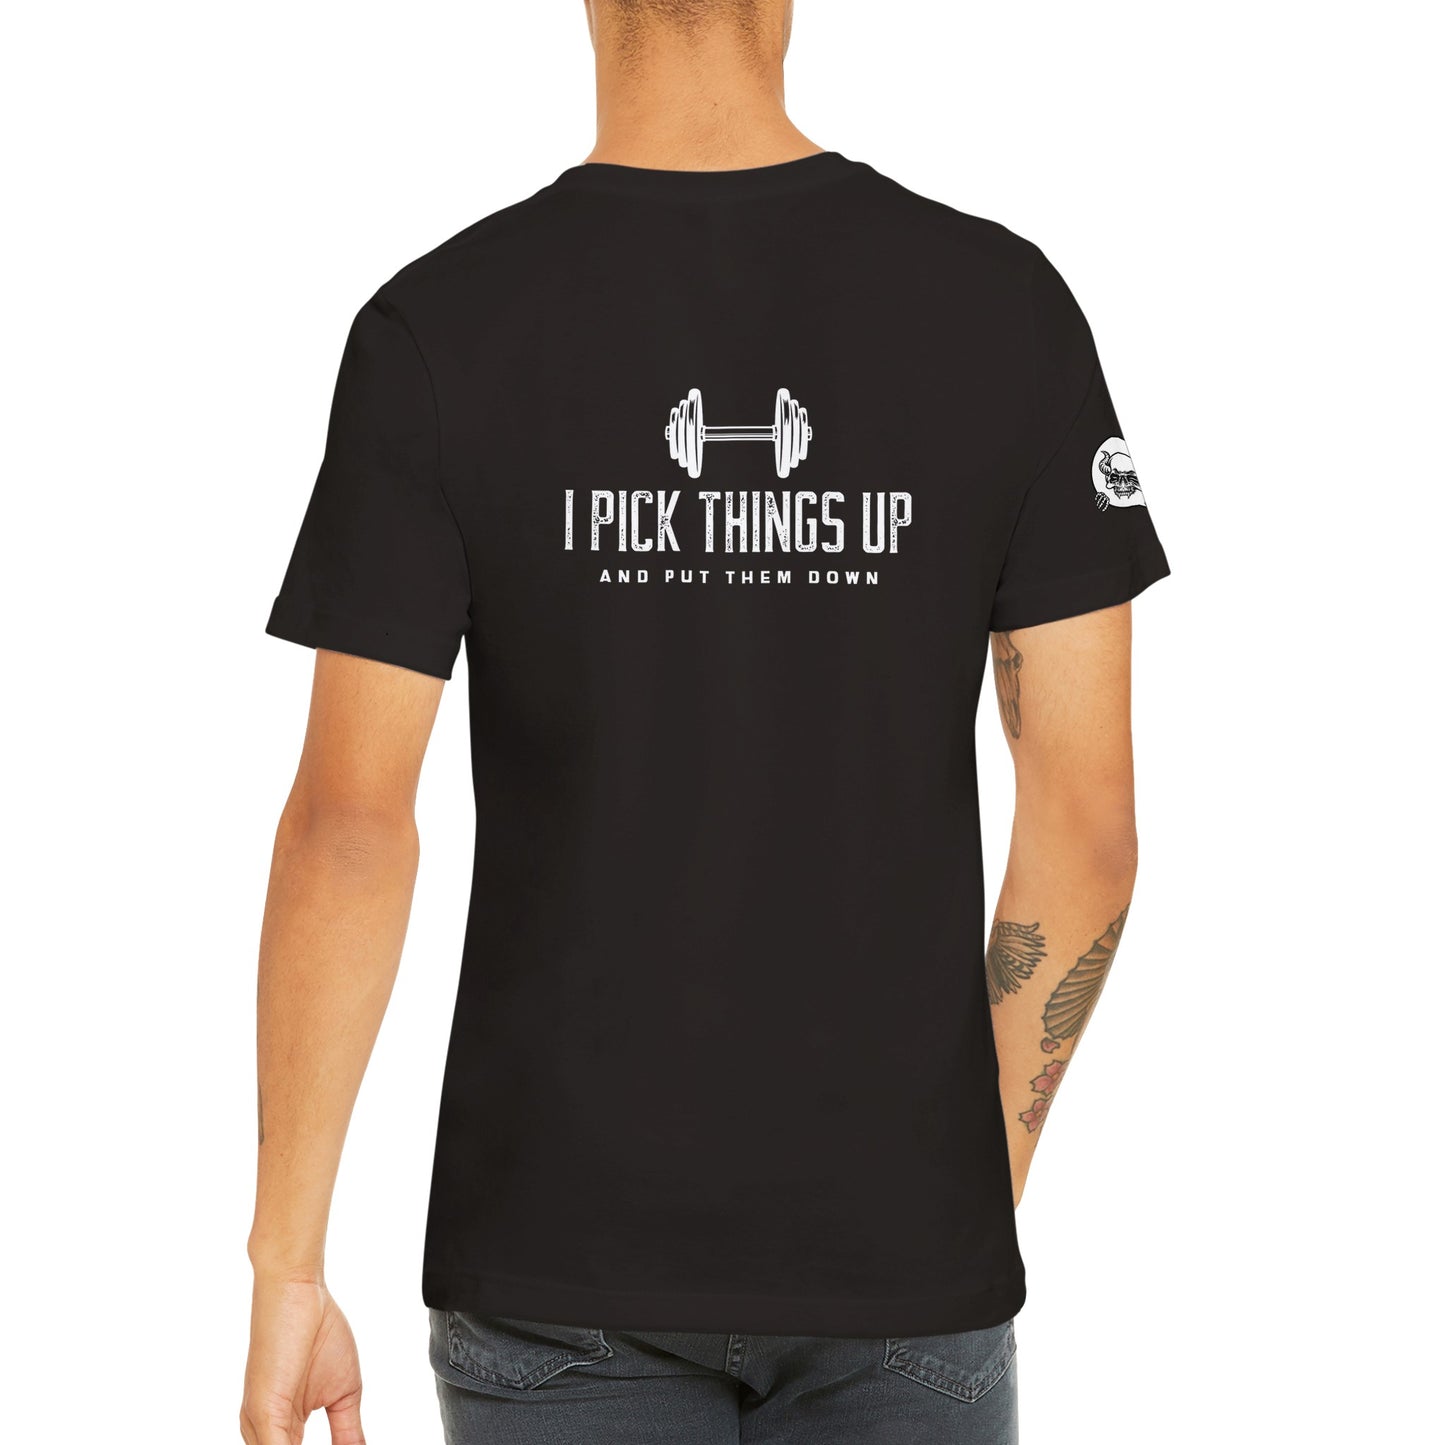 The "Strong Things" Premium Unisex Crewneck T-shirt